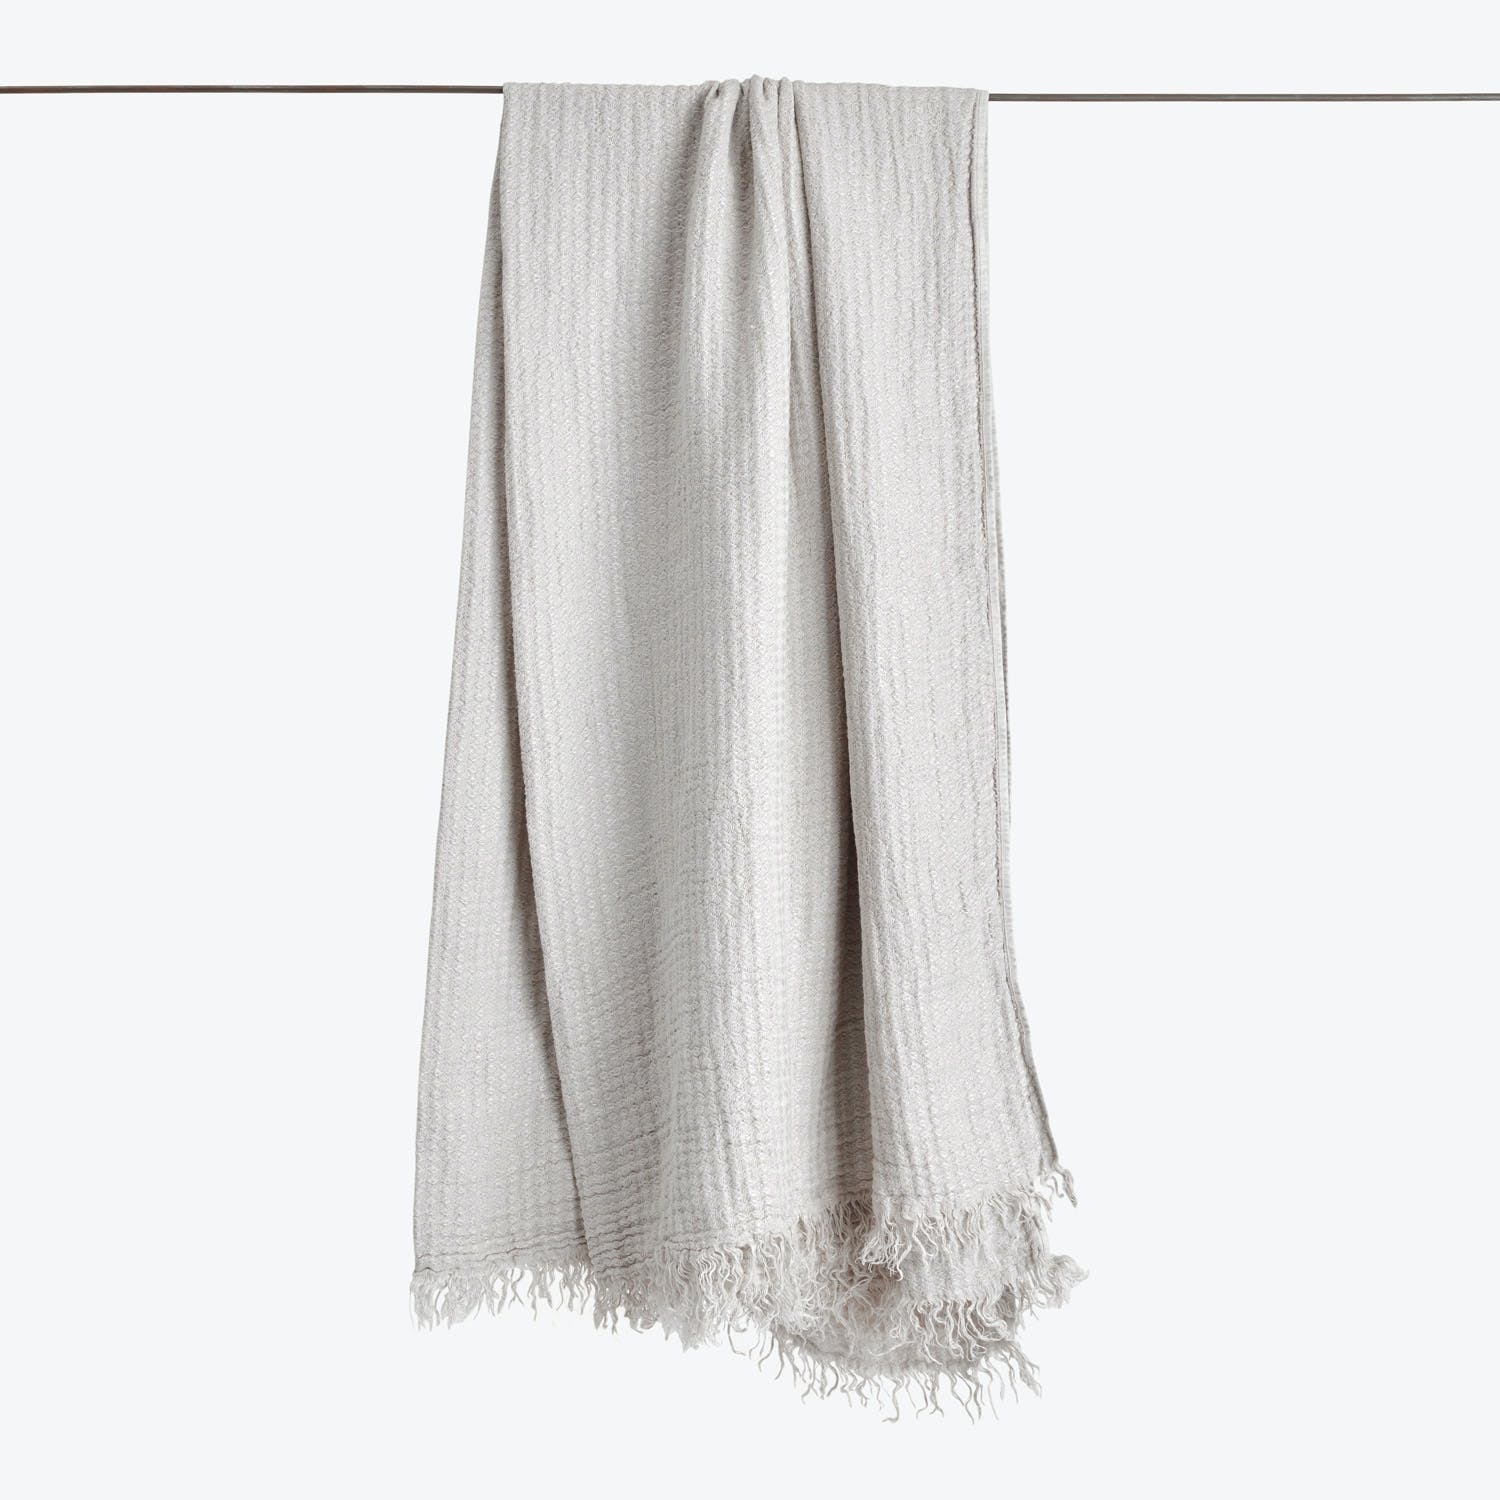 Light-colored fabric with subtle pattern and fringe detailing, hanging vertically.